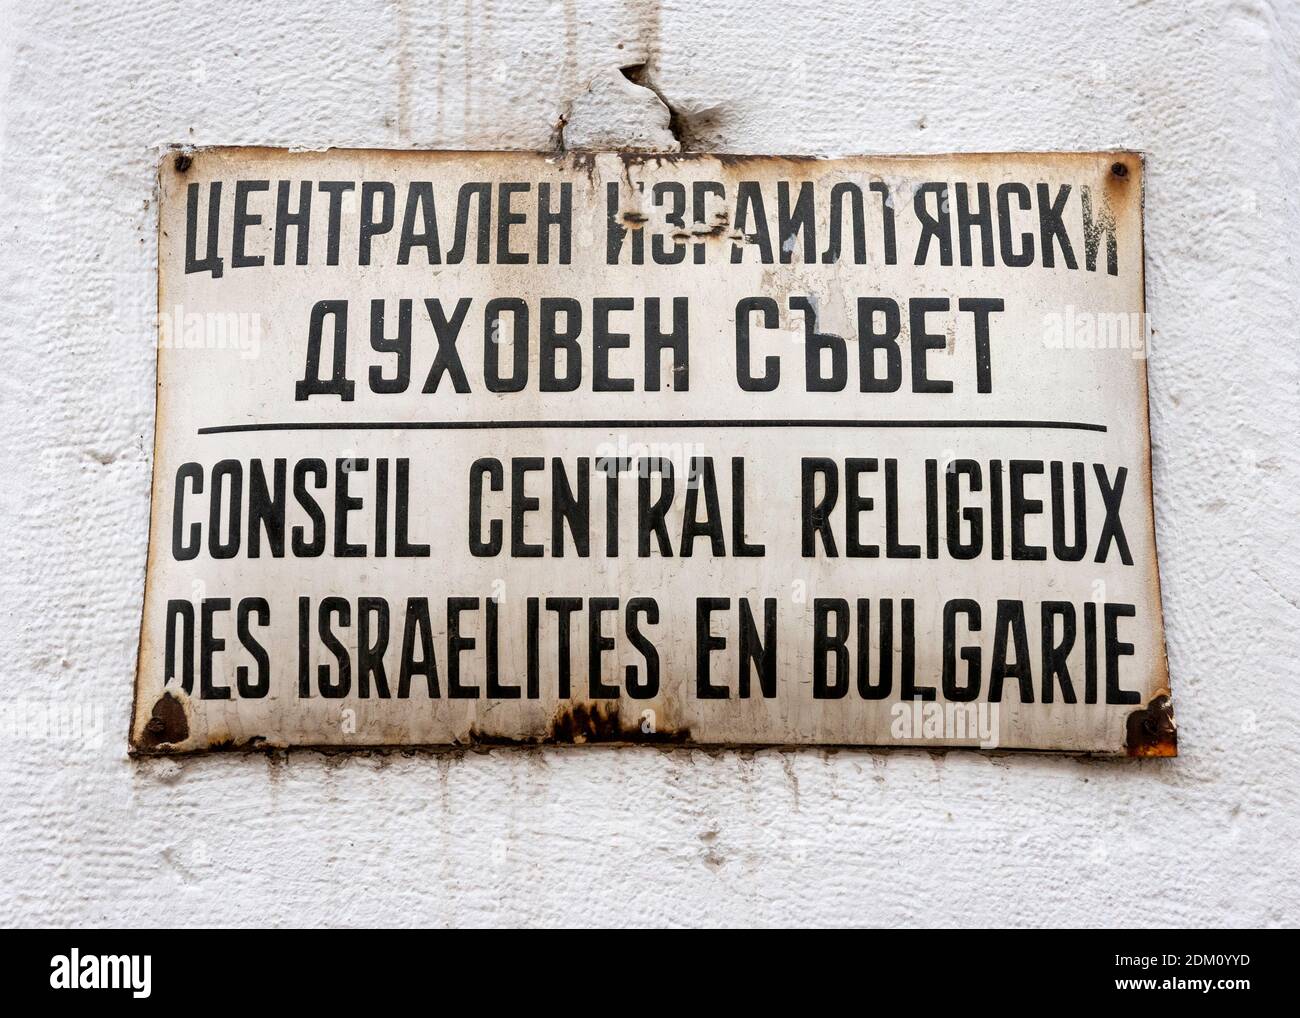 Old outdated sign for the Central Jewish Religious Council of Bulgaria in French language at the Synagogue or Shul in Sofia Bulgaria Eastern Europe Stock Photo